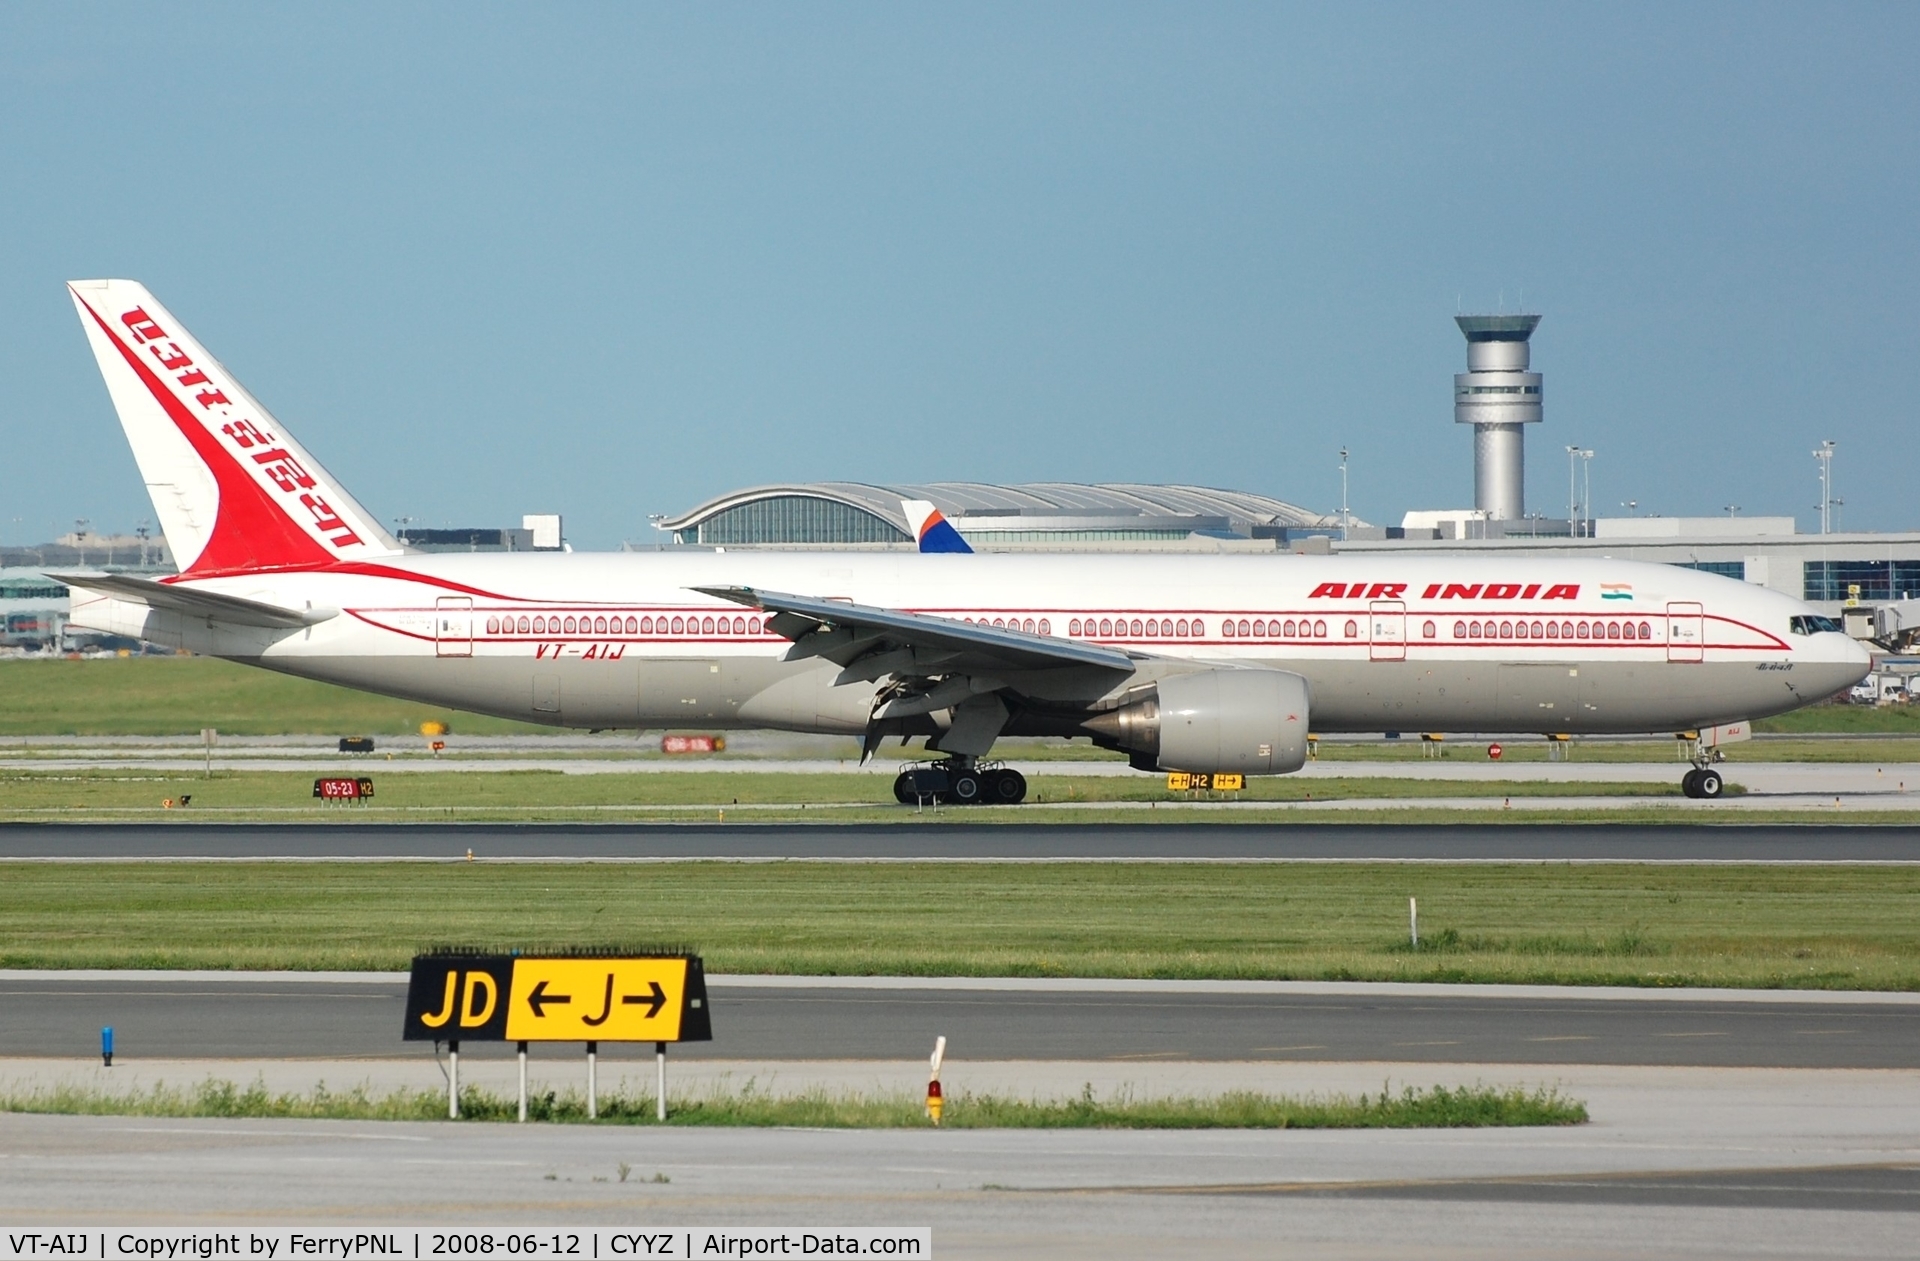 VT-AIJ, 1997 Boeing 777-222/ER C/N 26943, Arrival of Air India B772 in classic livery.